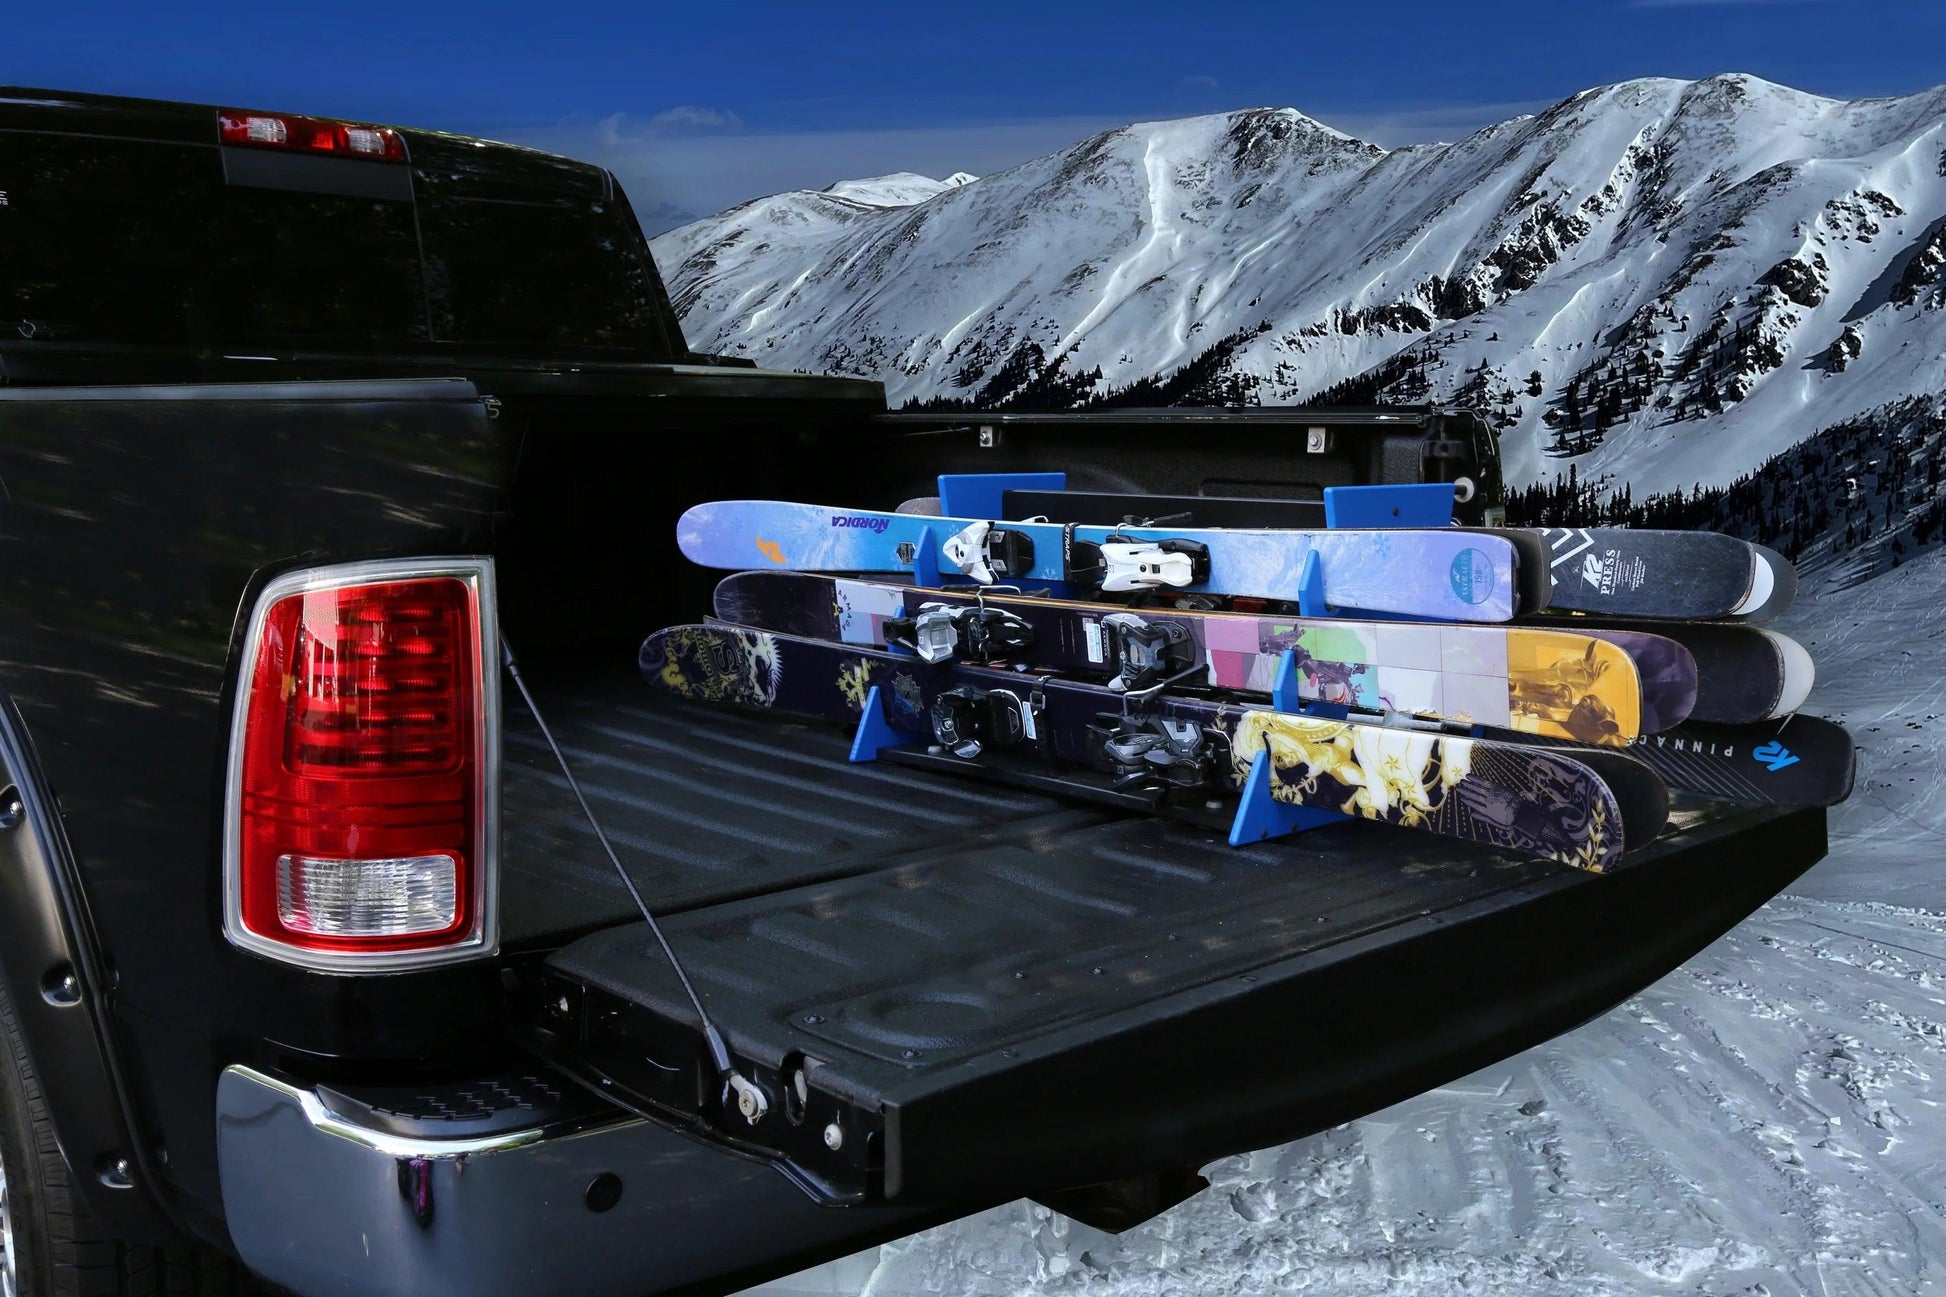 DINGED, DENTED OR SCRATCHED: TRAPSKI SIX PACK Mobile All Mountain Ski and Standard Stance Snowboard Rack - TRAPSKI, LLC